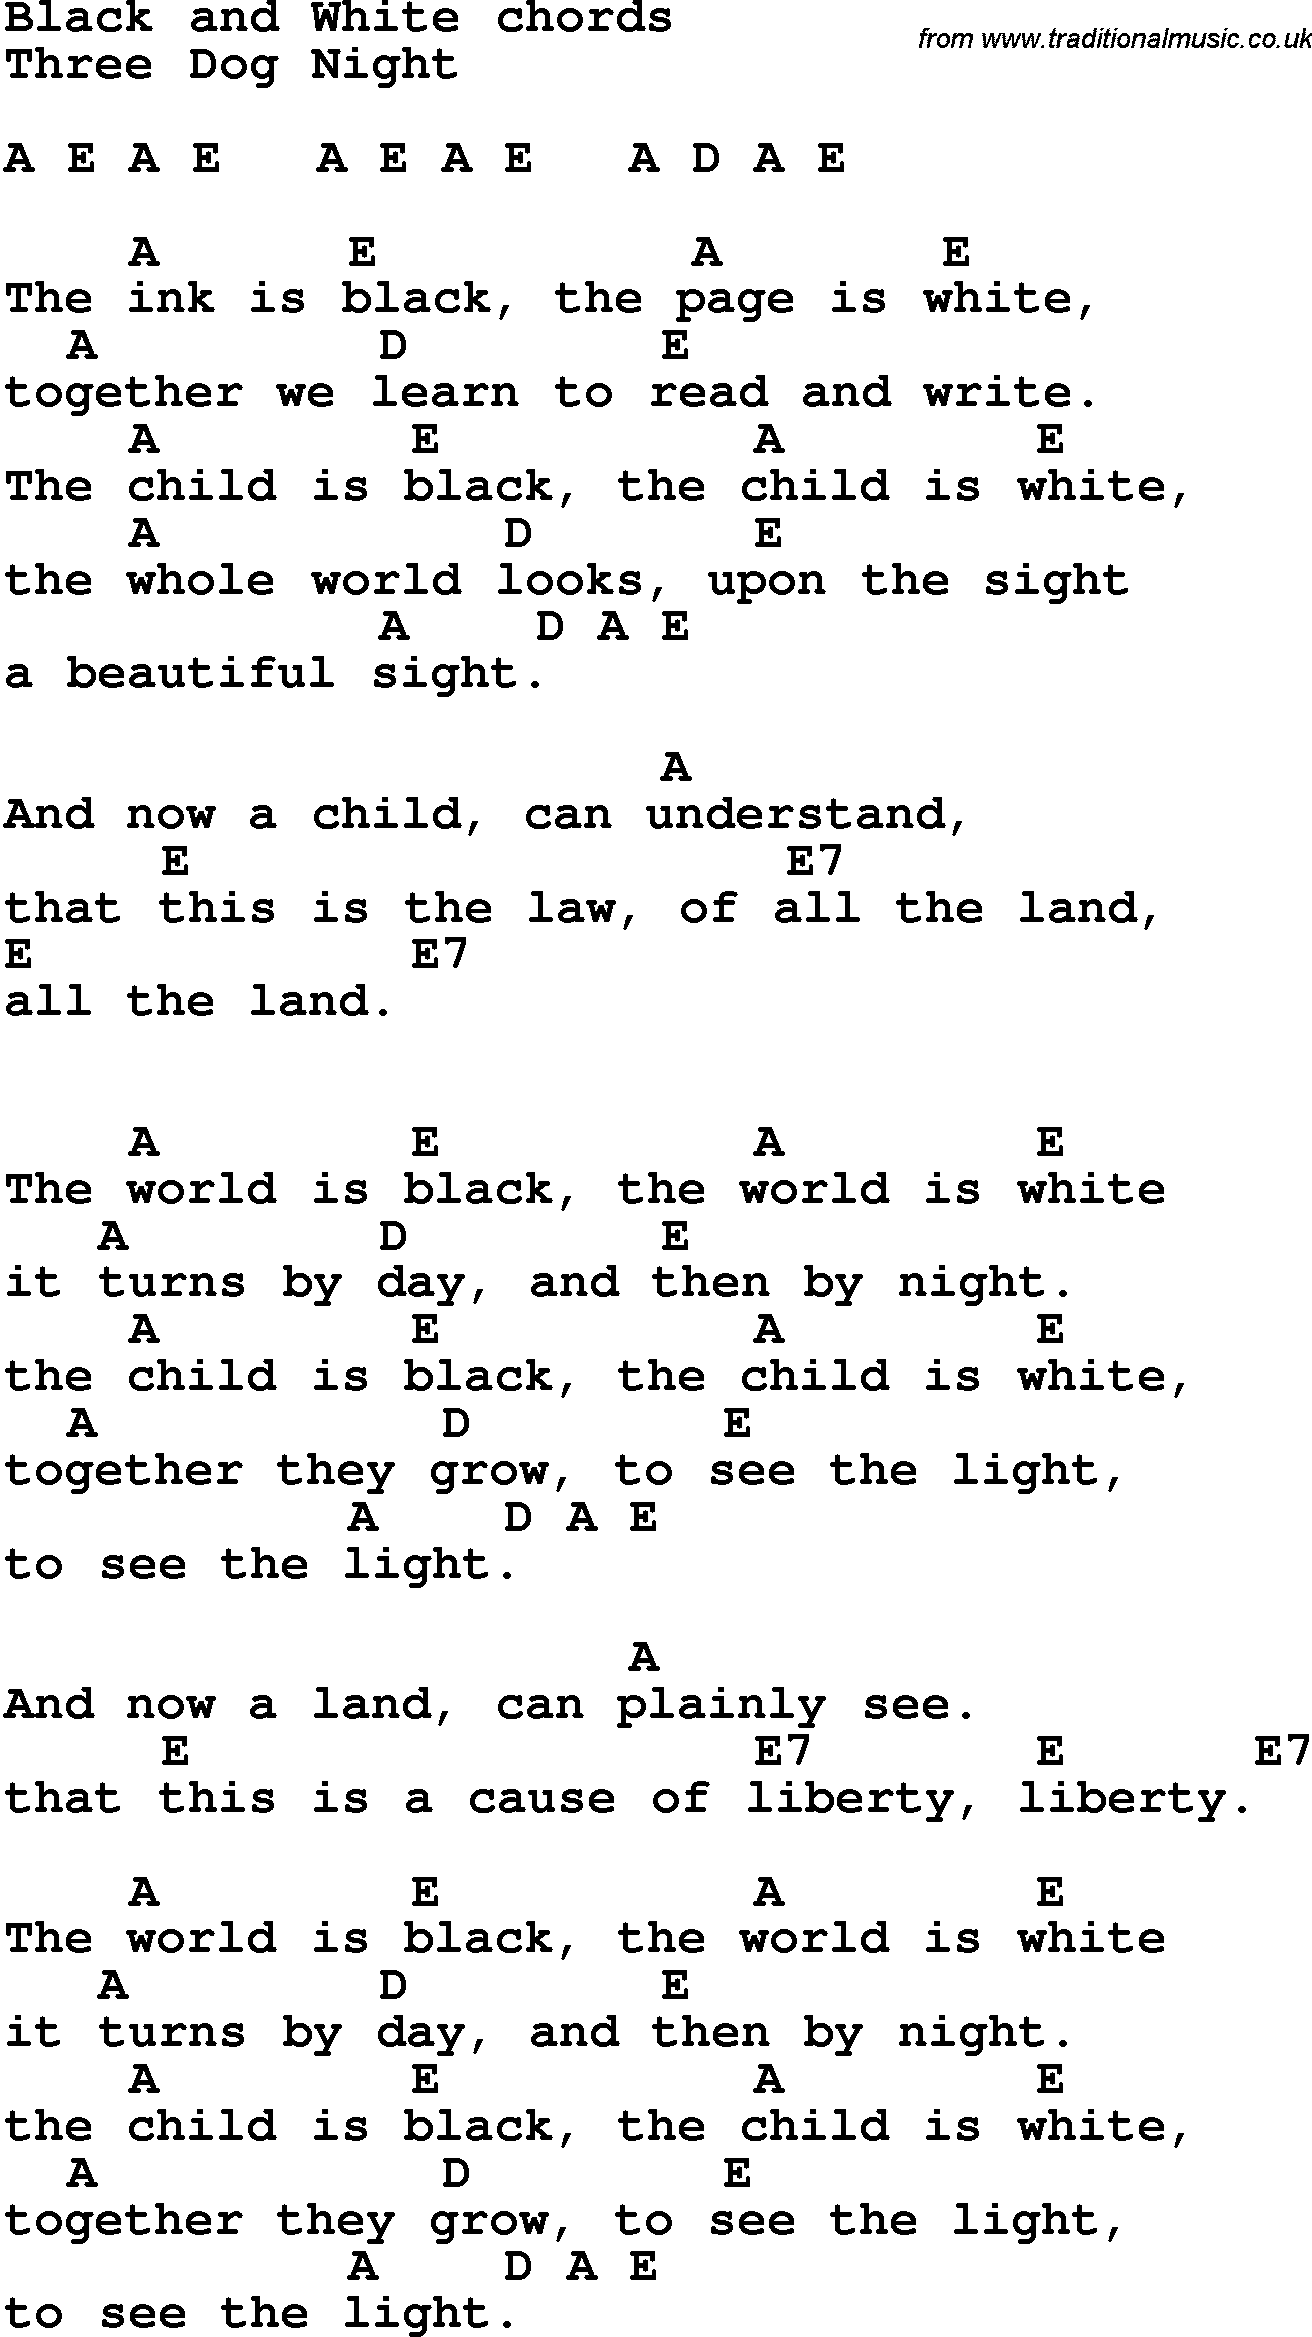 Song Lyrics with guitar chords for Black And White